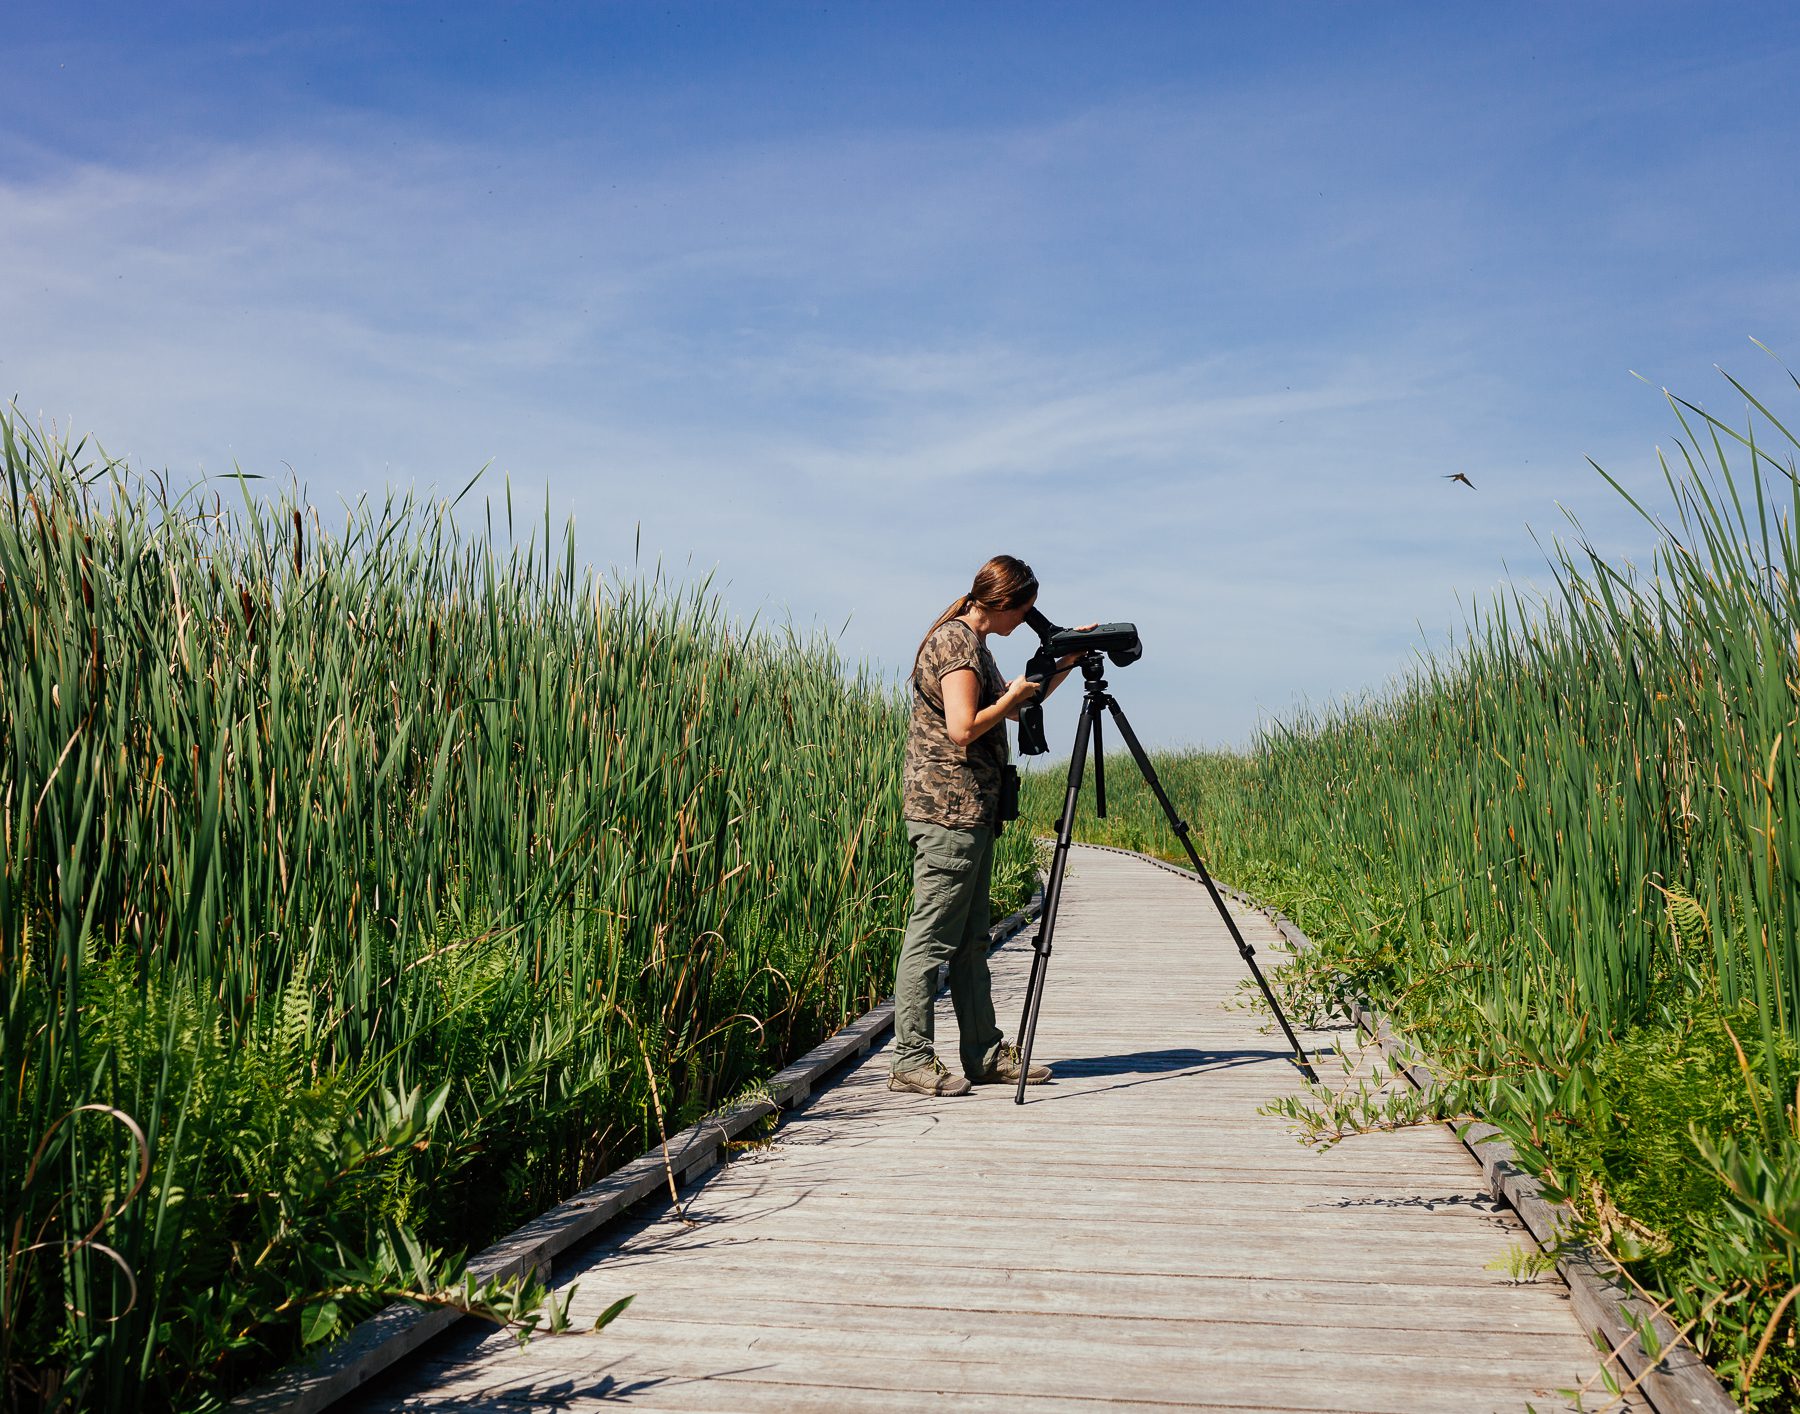 The marsh in Point Pelee is a place Heidi loves to bird. “It’s a perfect spot to watch shorebirds.” 